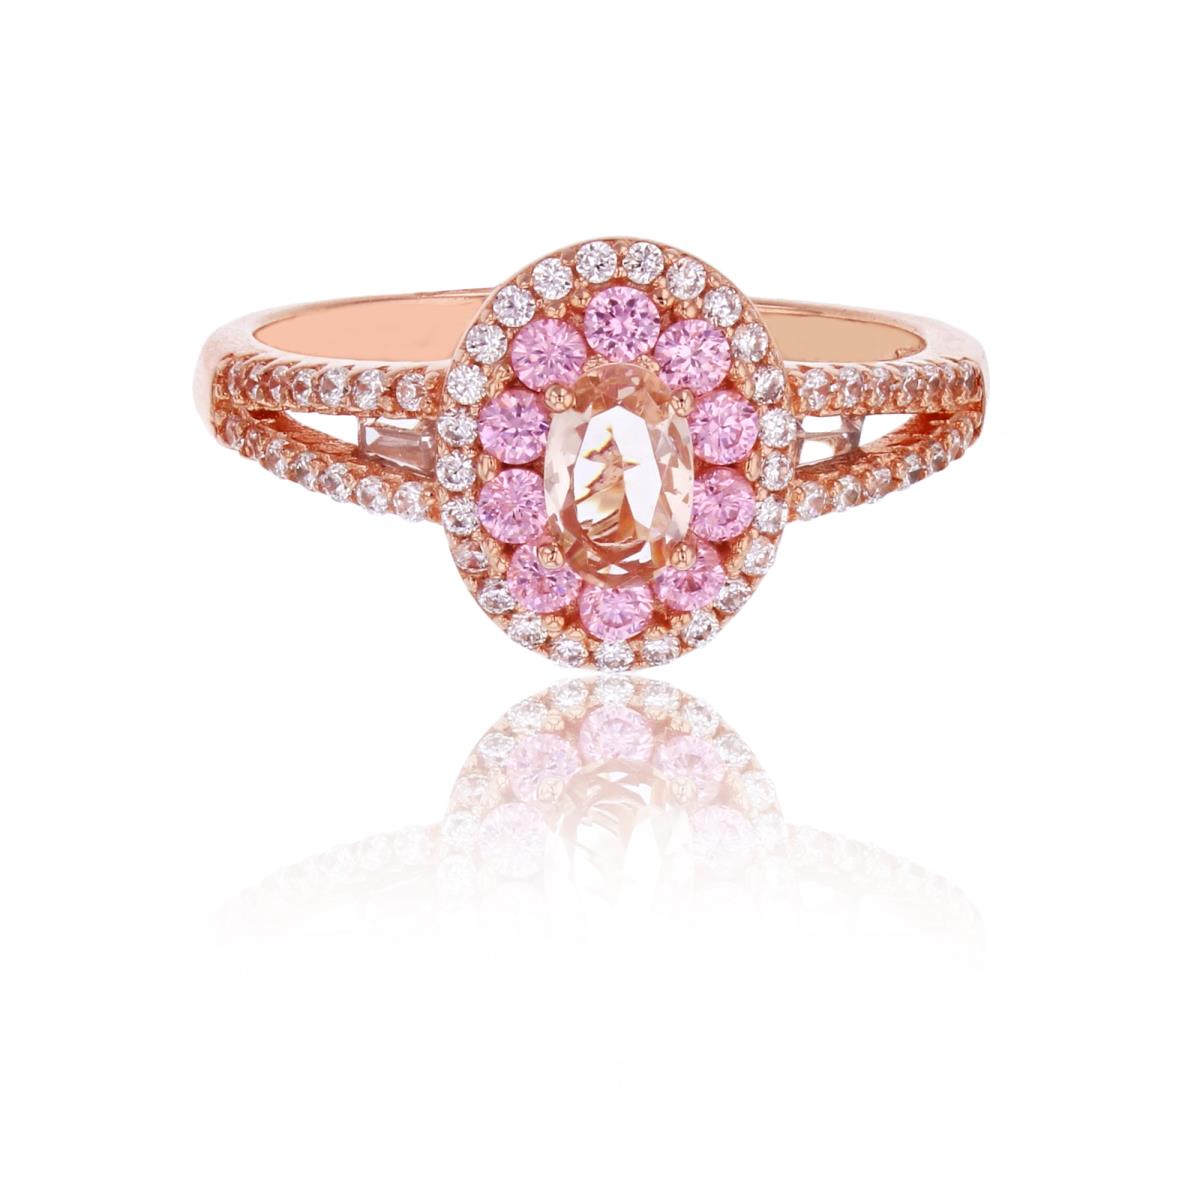 Sterling Silver Rose 6x4mm Morganite Nano Oval Cut with Pink & White CZ Double Halo & Sides Fashion Ring